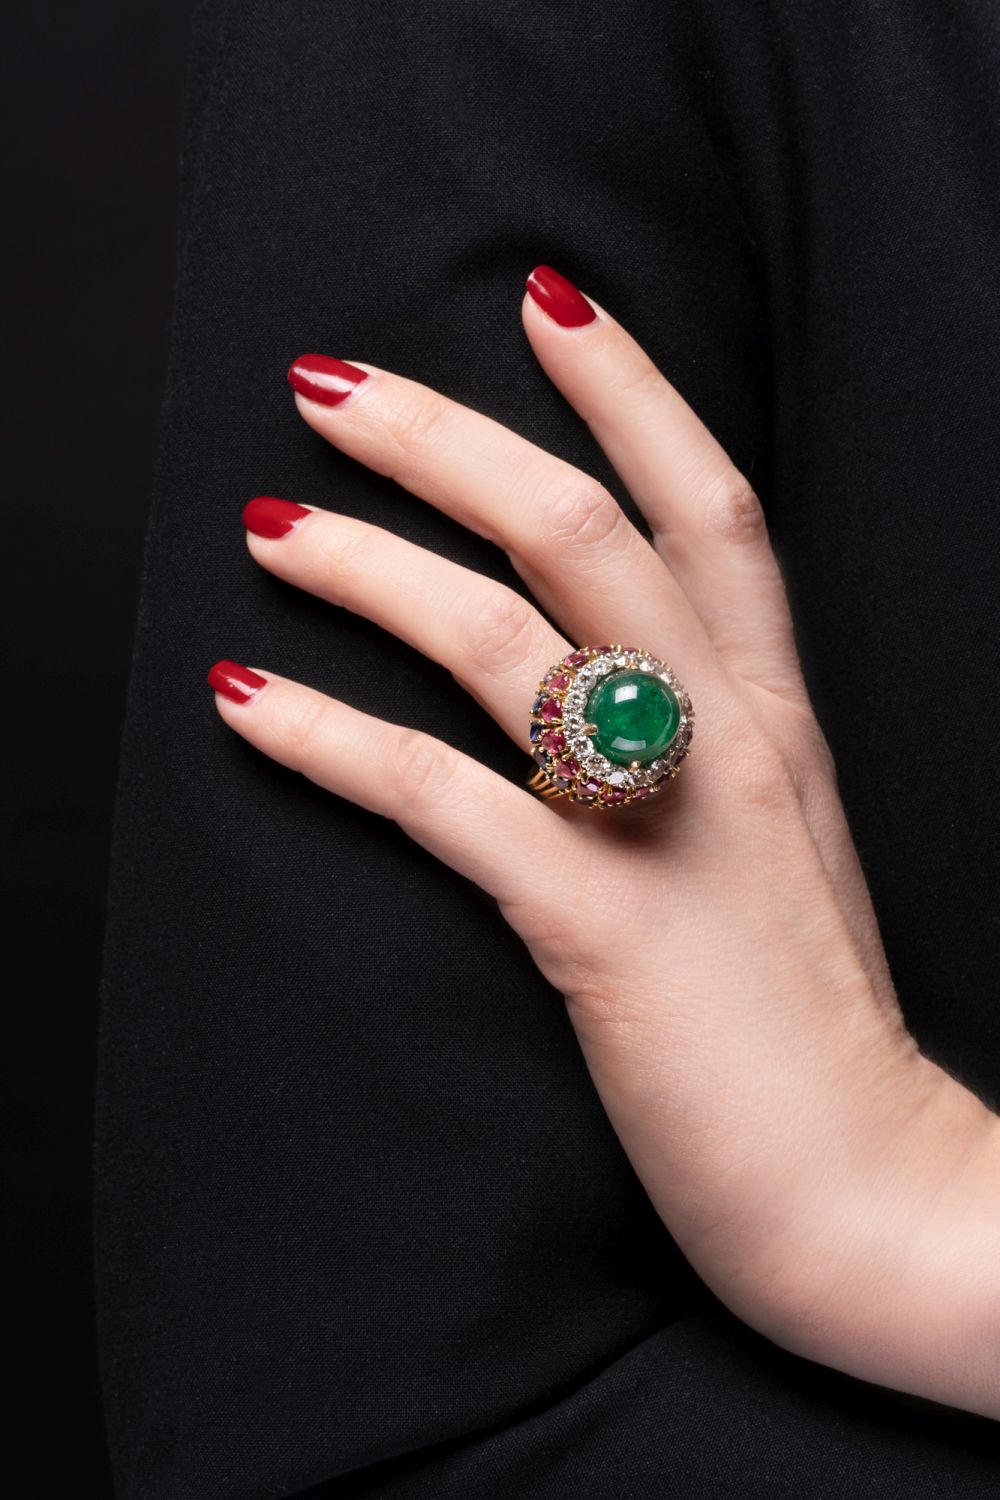 A rare Cocktailring with Emeralds, Sapphires and Rubies - image 3